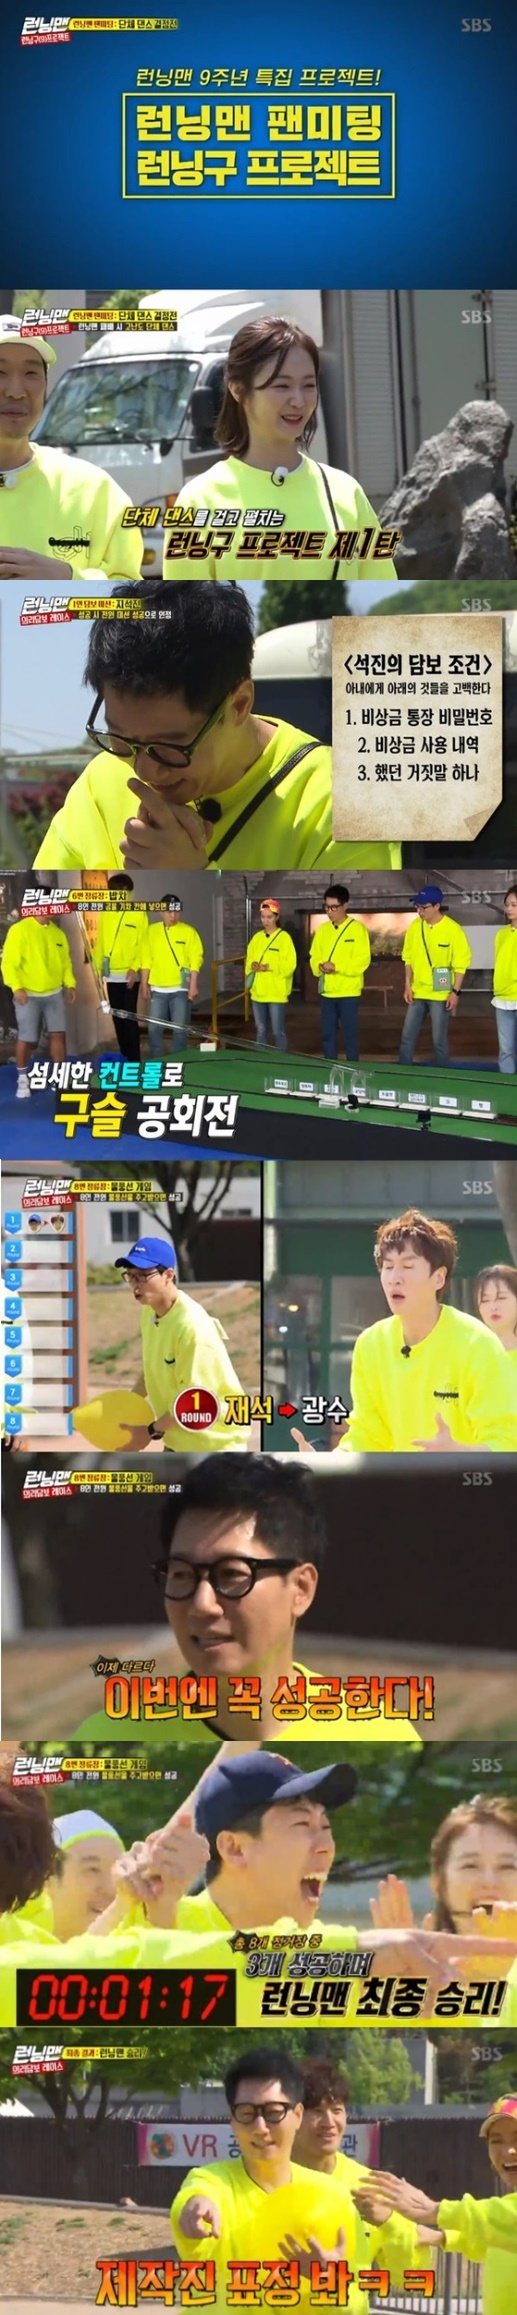 SBS Running Man ratings have risen sharply.According to Nielsen Korea, a ratings agency on the 20th, Running Man, which was broadcast on the afternoon of the 19th, ranked first in the overwhelming same time zone with 5.1% (based on the second part of the Seoul Capital Areas household ratings) in the 2049 target audience rating, which is an important indicator of major advertising officials.The average audience rating also rose, recording 5.3% in the first part and 8.4% in the second part (based on the audience rating of households in the Seoul Seoul Capital Area), and the highest audience rating per minute rose to 8.9%.As previously announced, the Running Man 9th anniversary special project Running Man Fan Meeting - Running Project was first released.The crew and members who had a special race for four weeks with the right to organize a fan meeting queue sheet played their first showdown with group dance on the broadcast.If the members win, they can dance in addition to the candidate dance prepared by the production team, but if they are defeated, they should dance recommended by the production team.The members were united in teamwork and started a fierce 8th round confrontation with the production team, eventually winning three wins and winning the victory.The scene had the highest audience rating of 8.9% per minute, accounting for the best one minute.